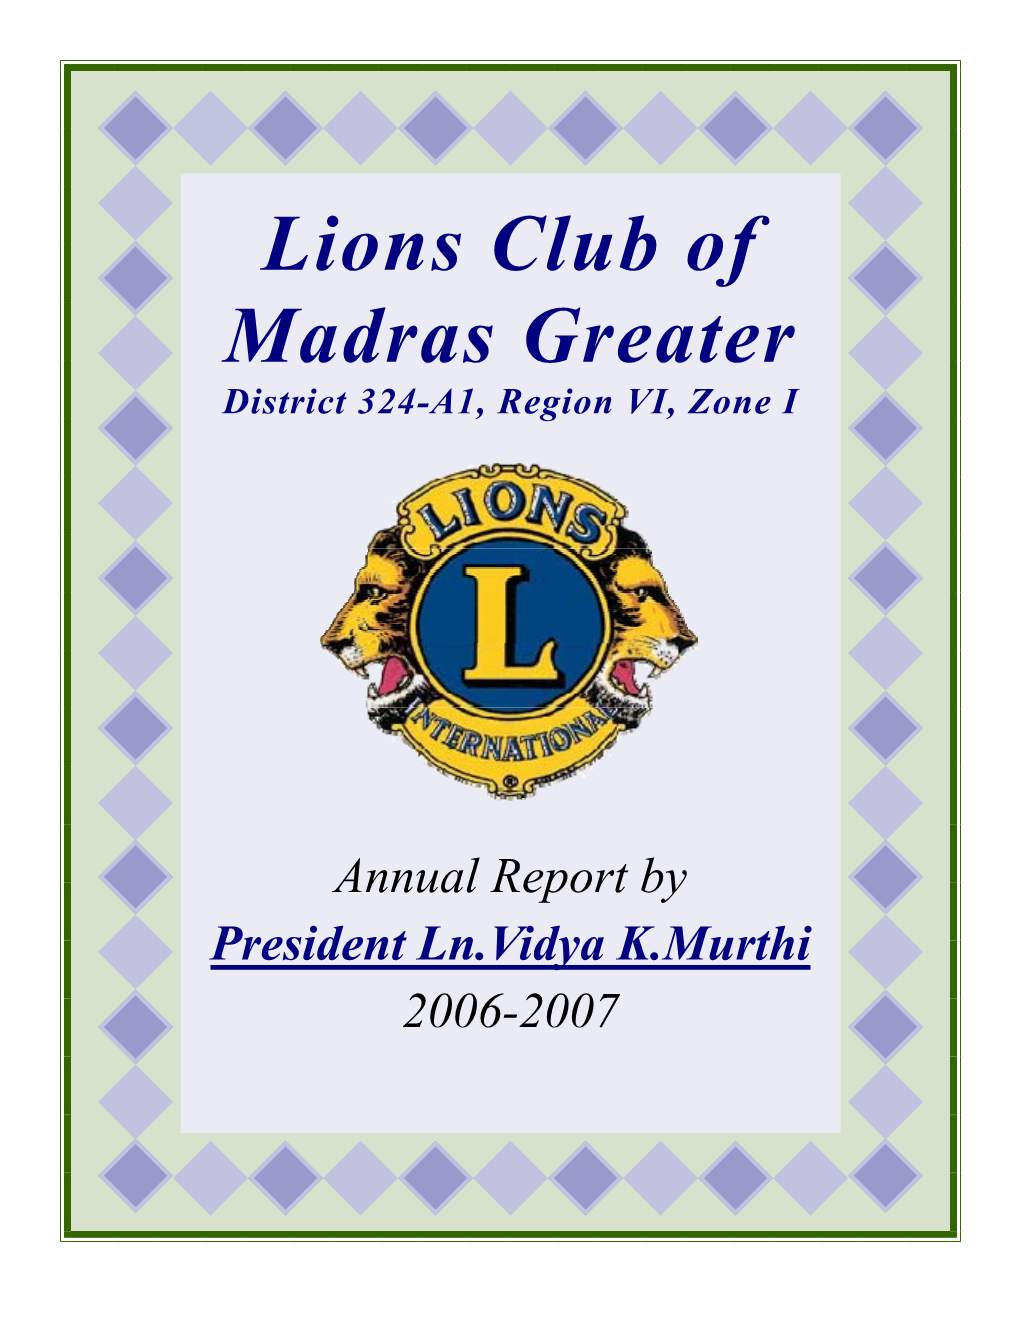 Lions Club of Madras Greater District 324-A1, Region VI, Zone I